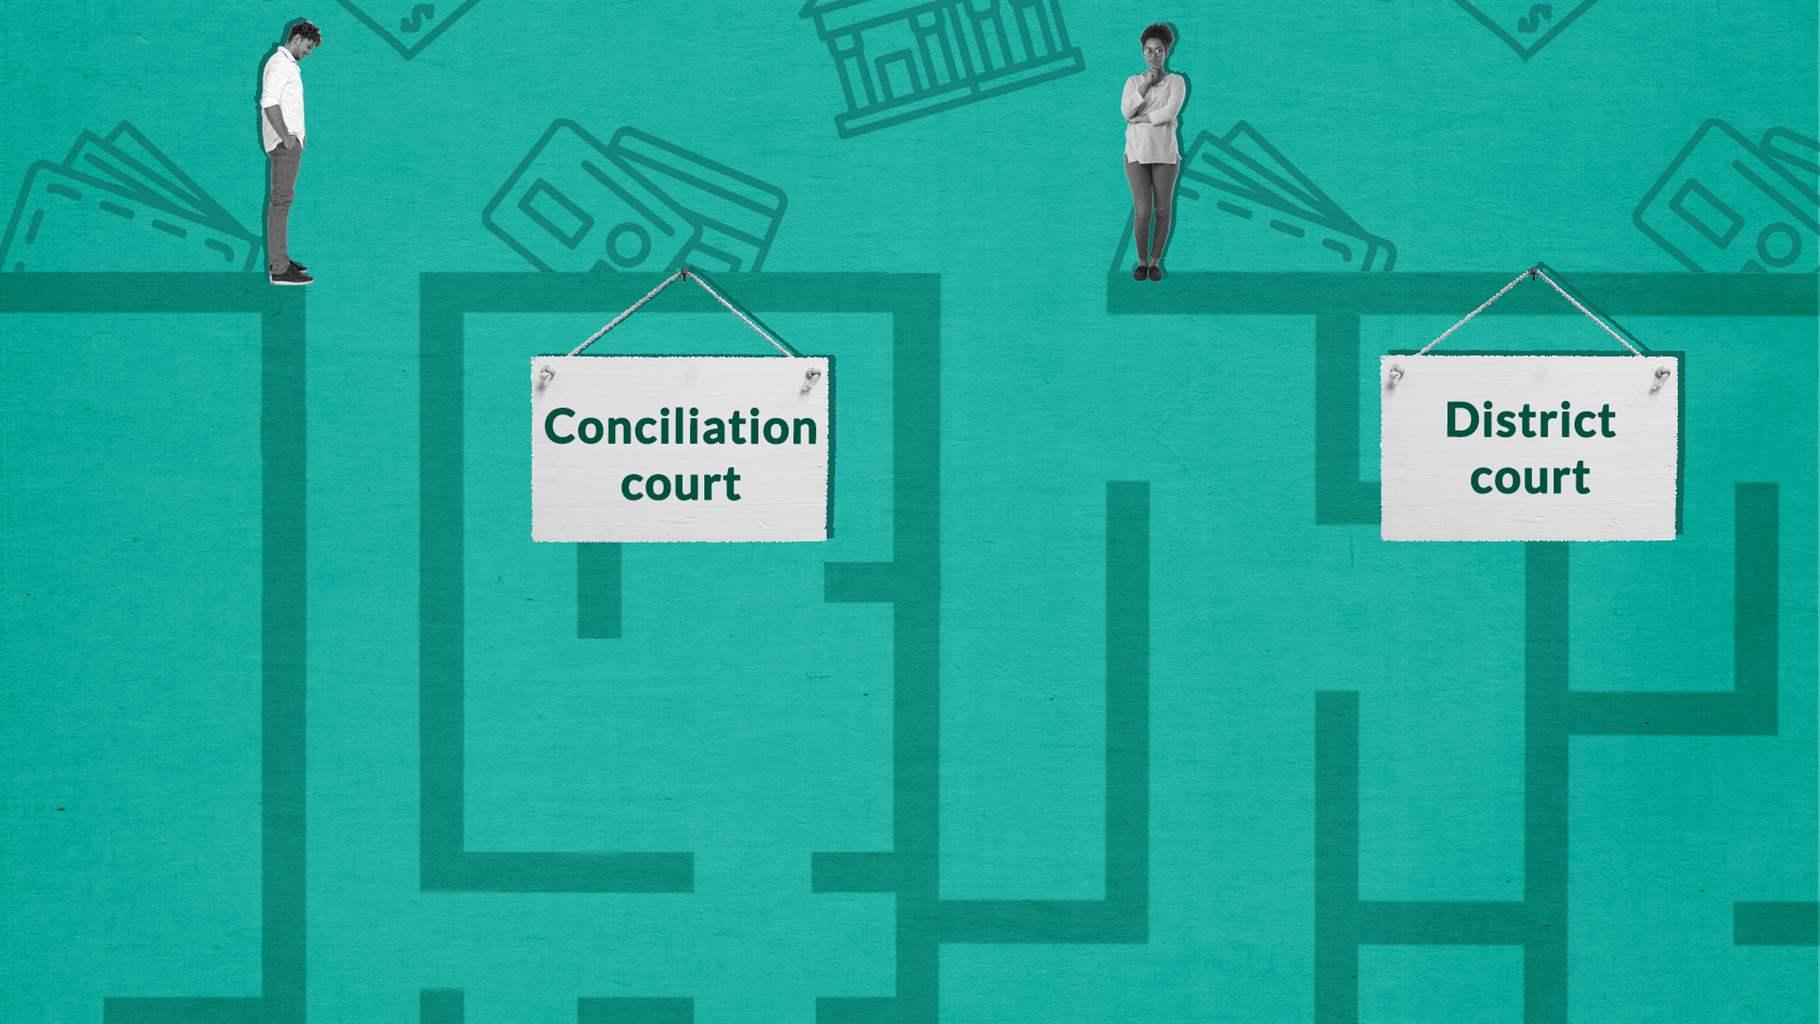 An illustration showing two people standing atop a maze; the entry point to the left is labeled conciliation court, and the one to the right is labeled district court. The backdrop is green with icons of credit cards, a wallet, and a building at the top of the image.